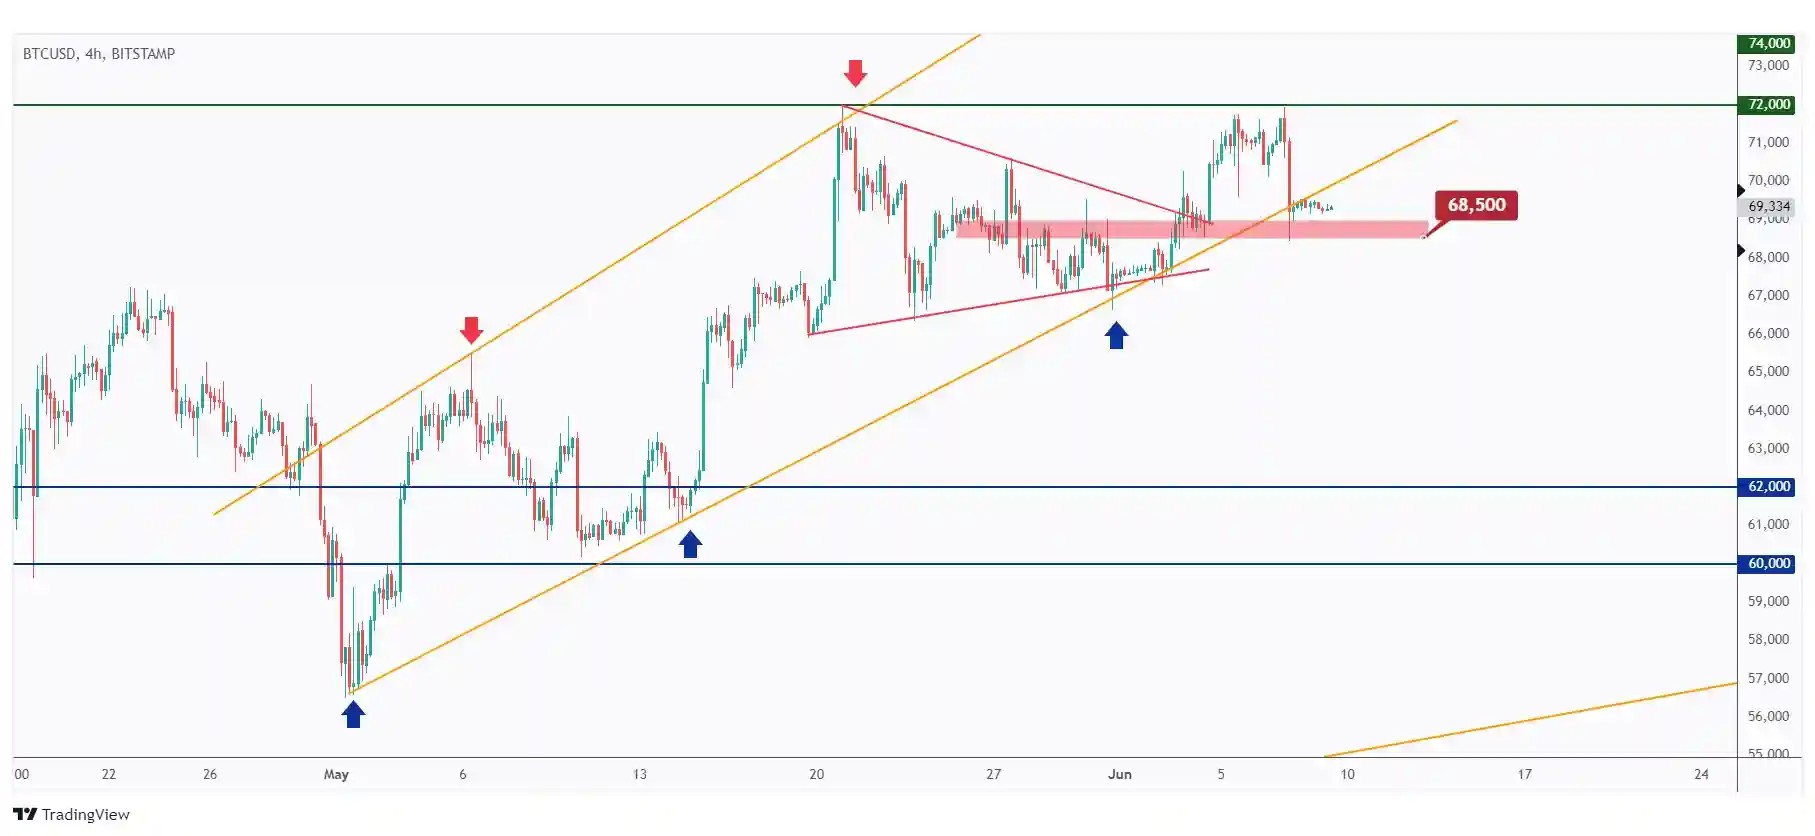 BTC 4h chart overall bullish as long as it is trading above the last low at $68,500.